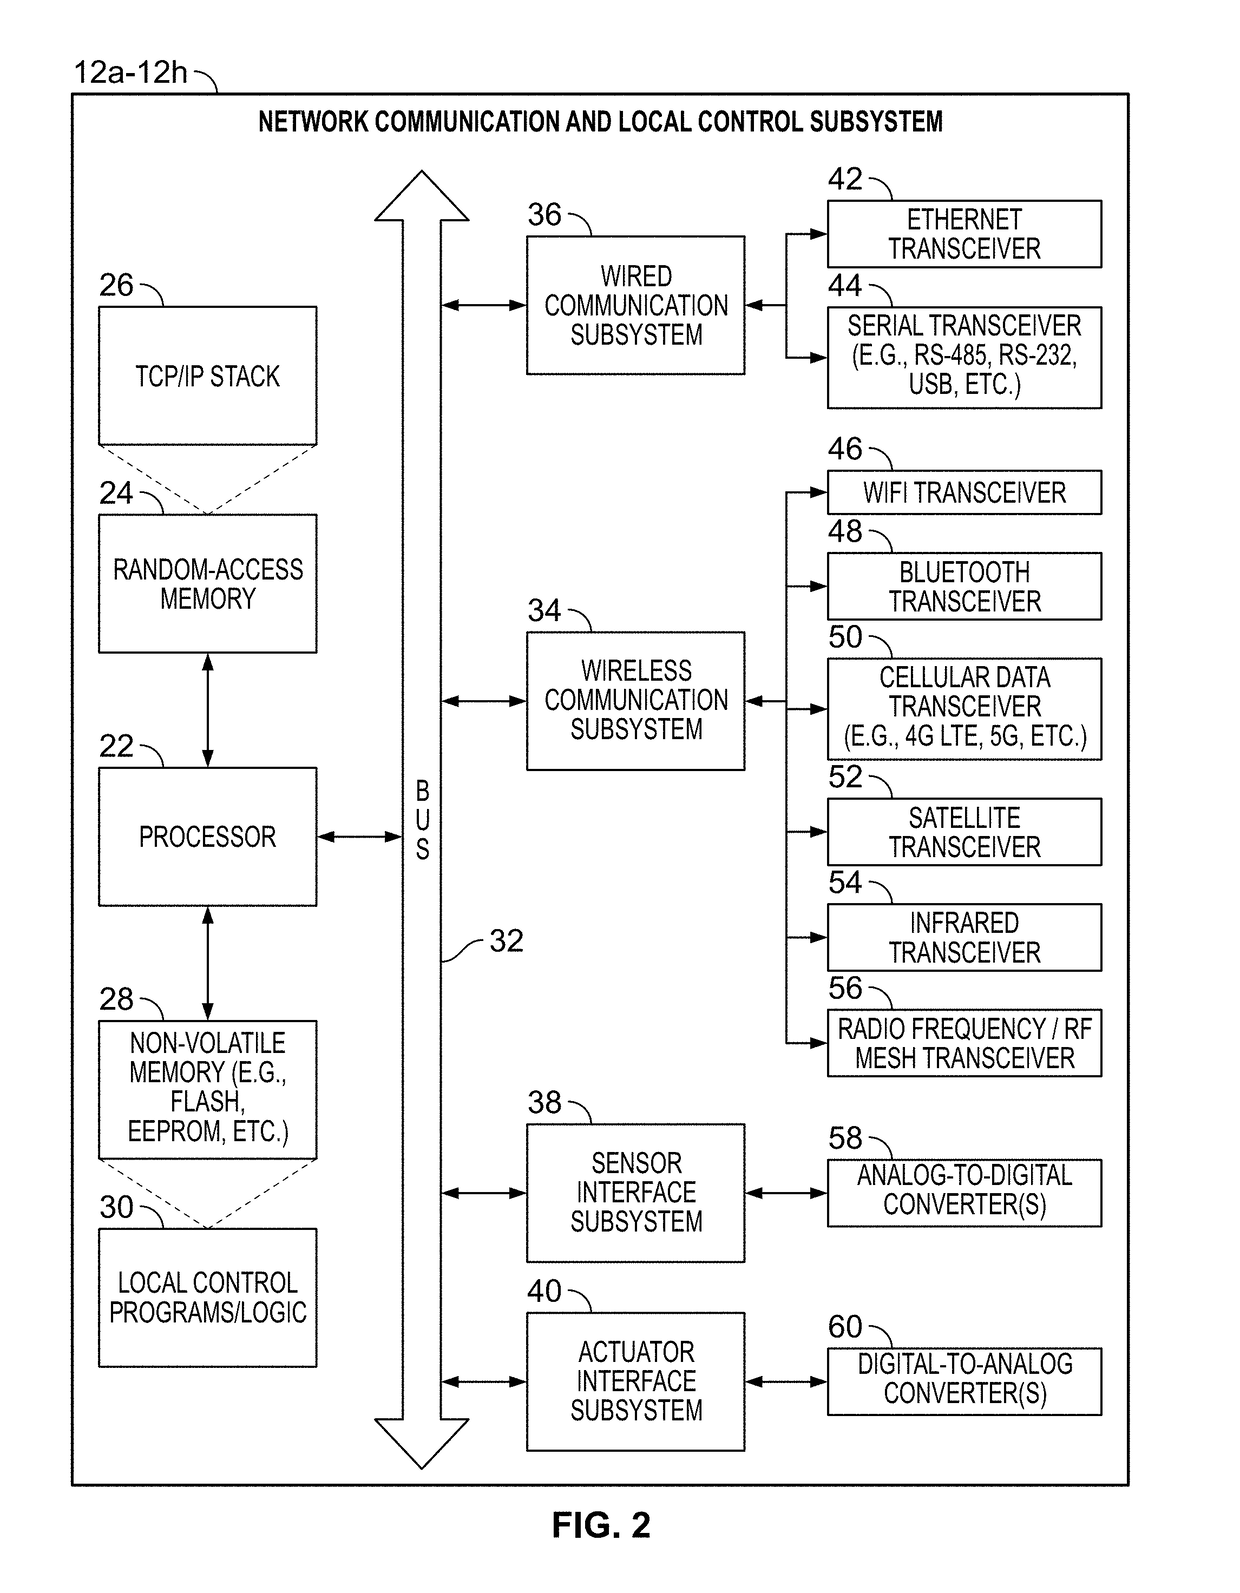 Systems and methods for providing network connectivity and remote monitoring, optimization, and control of pool/spa equipment